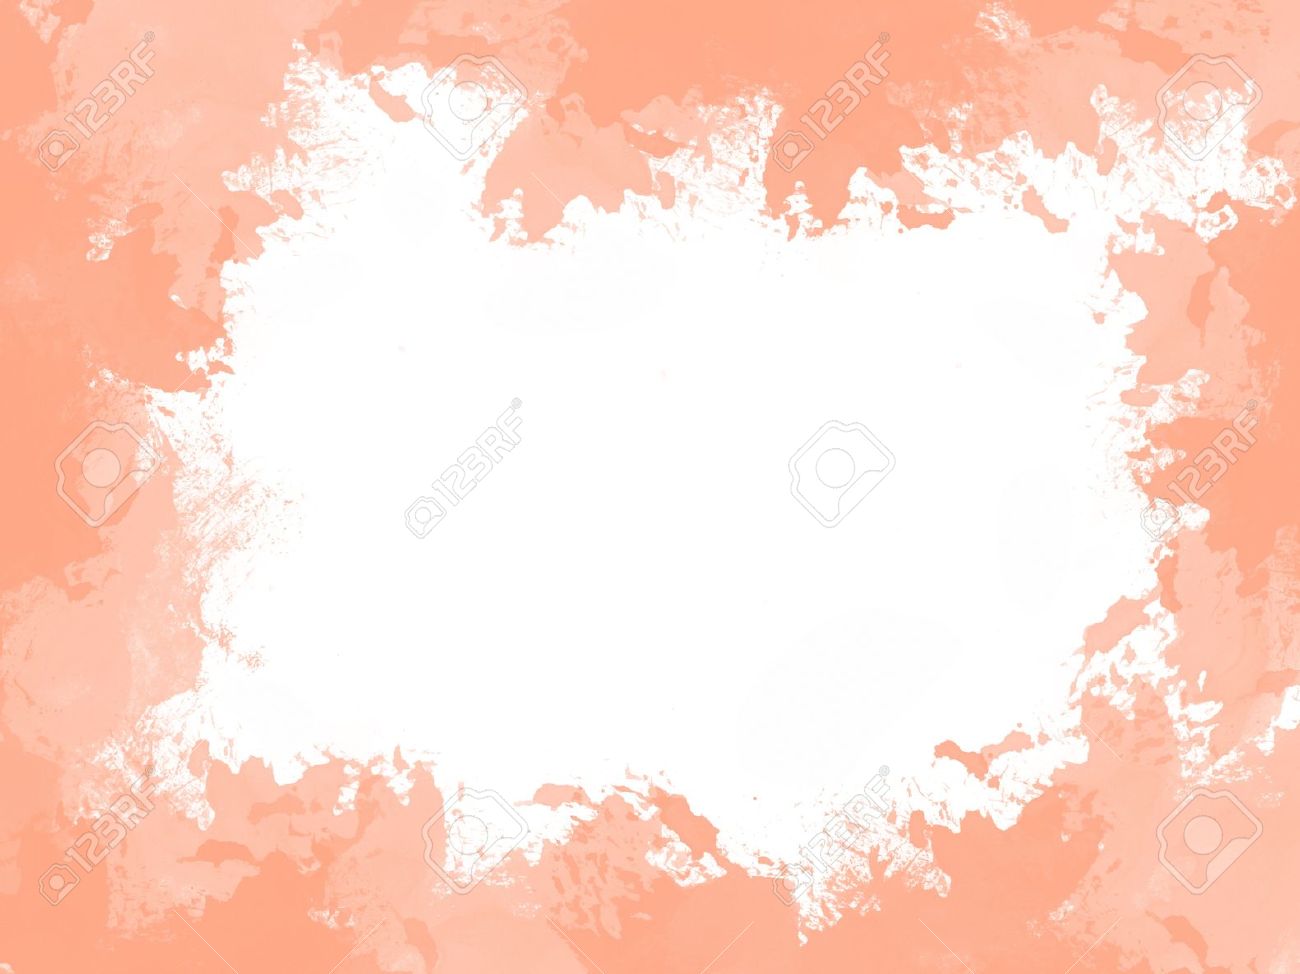 Abstract Water Color Peach Orange Frame Background Stock Photo